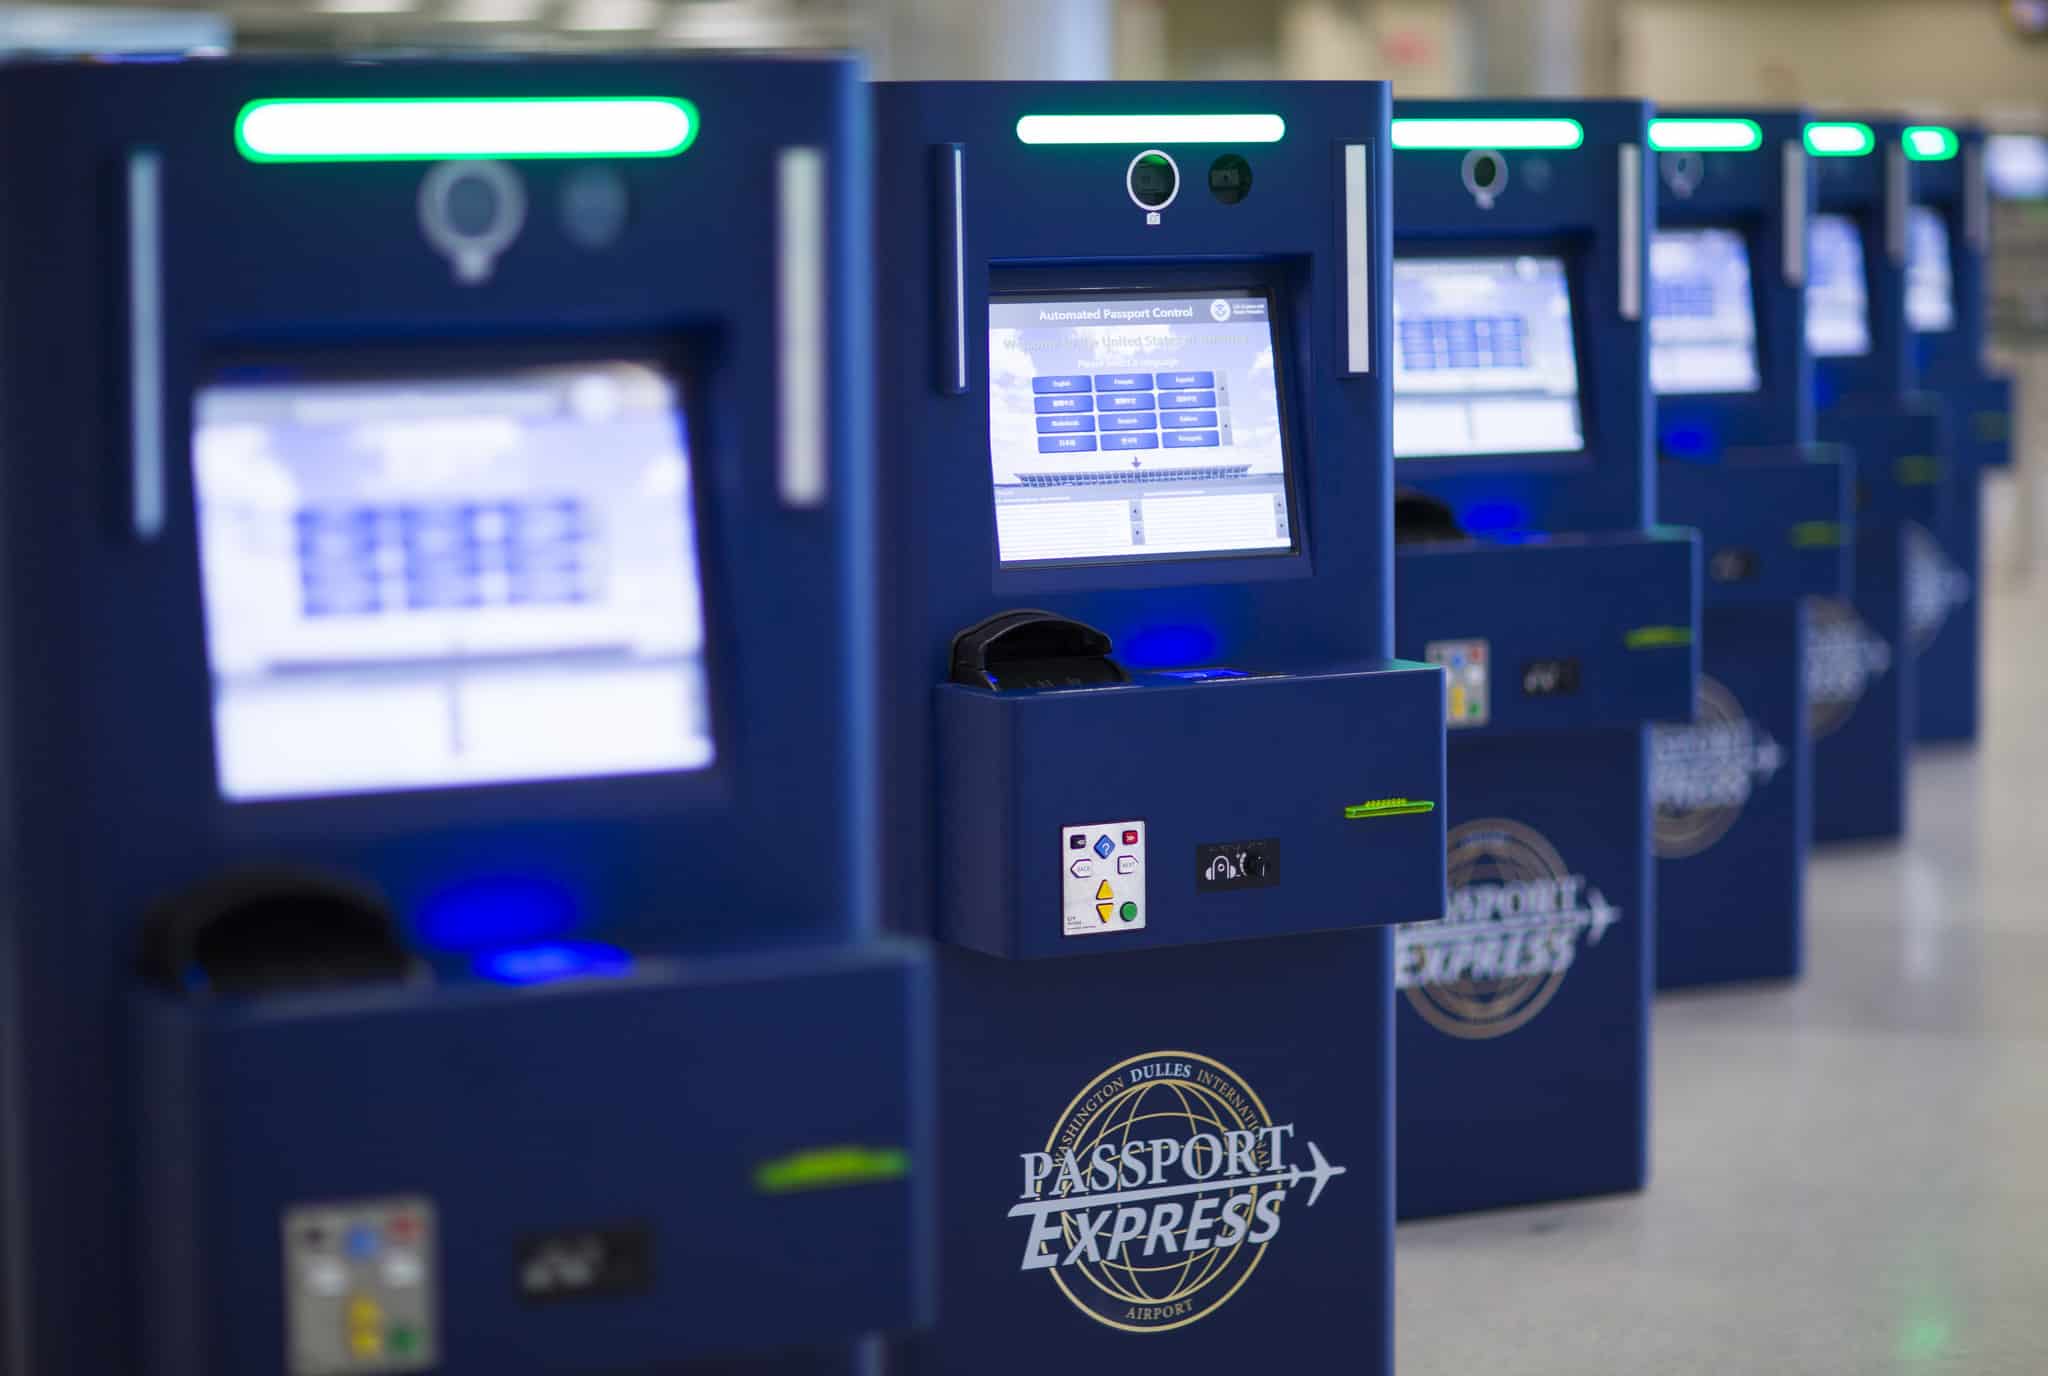 Hstoday Global Entry Begins Touchless Processing at Chicago O’Hare HS